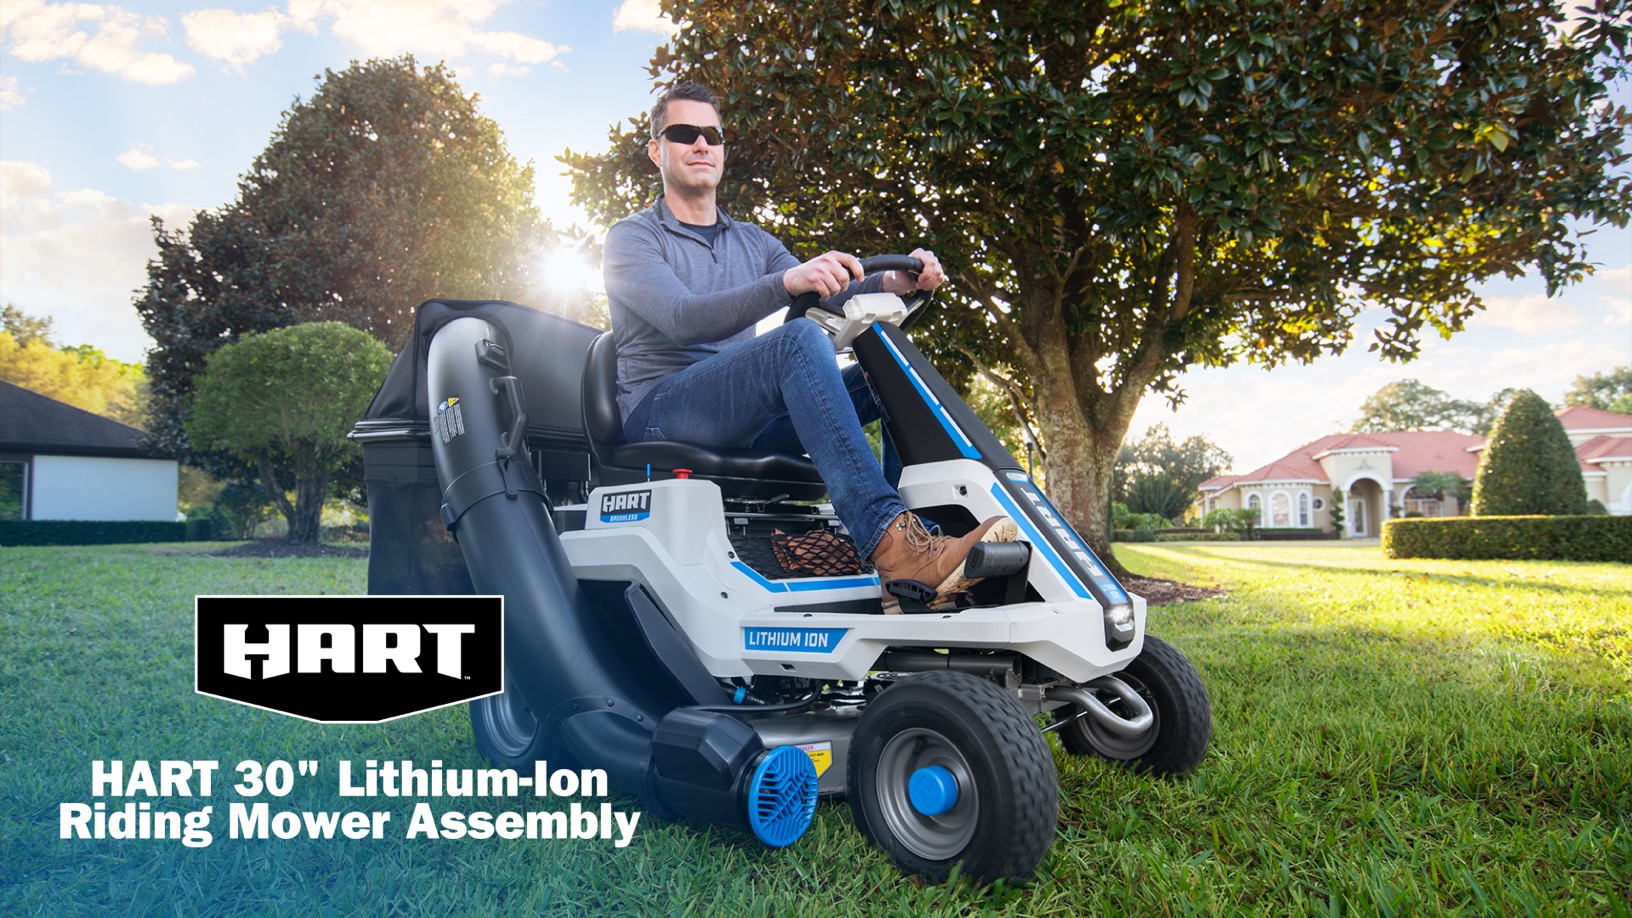 How to uncrate and assemble HART 80V Brushless 30" lithium-Ion Riding Mower